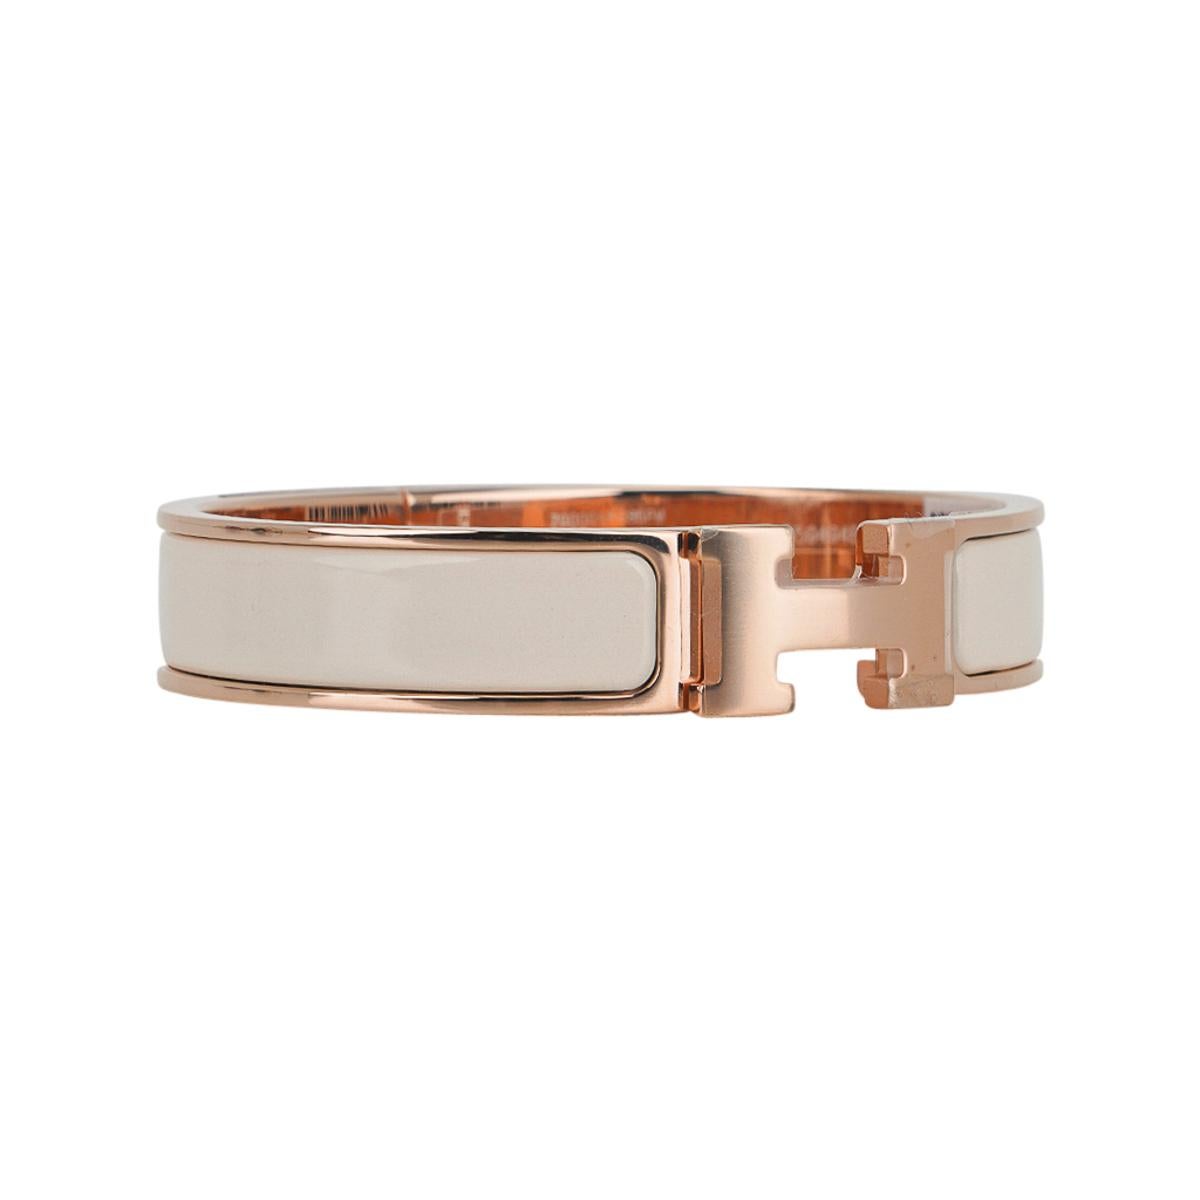 Hermes Creme Clic H Schmales Emaille-Armband Rose Gold PM im Angebot 1